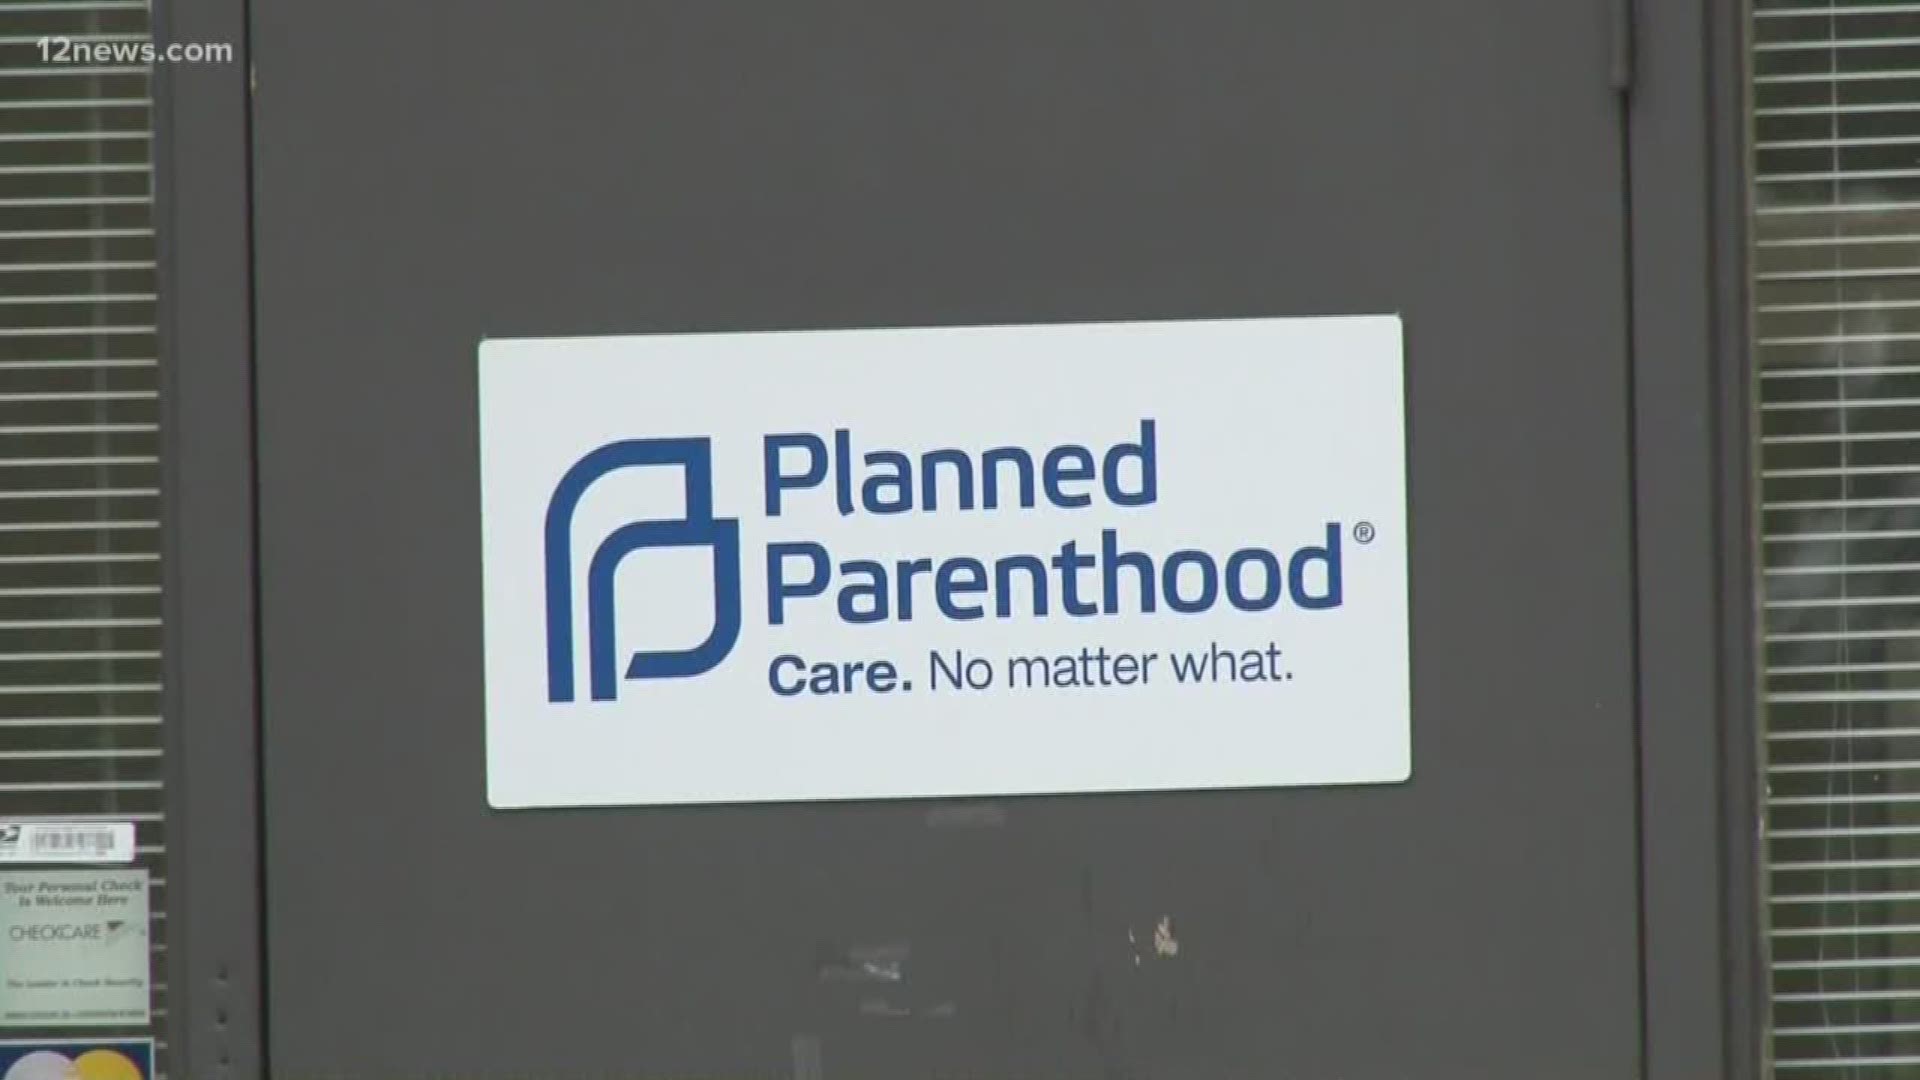 A Maricopa County jury has awarded $3 million to a Planned Parenthood whistleblower who was fired after alerting supervisors to a high rate of medical complications linked to a specific provider. The president of the organization said in a statement that the evidence was compelling that it was the former employee's failure to follow organizational rules and procedures that led to her firing.